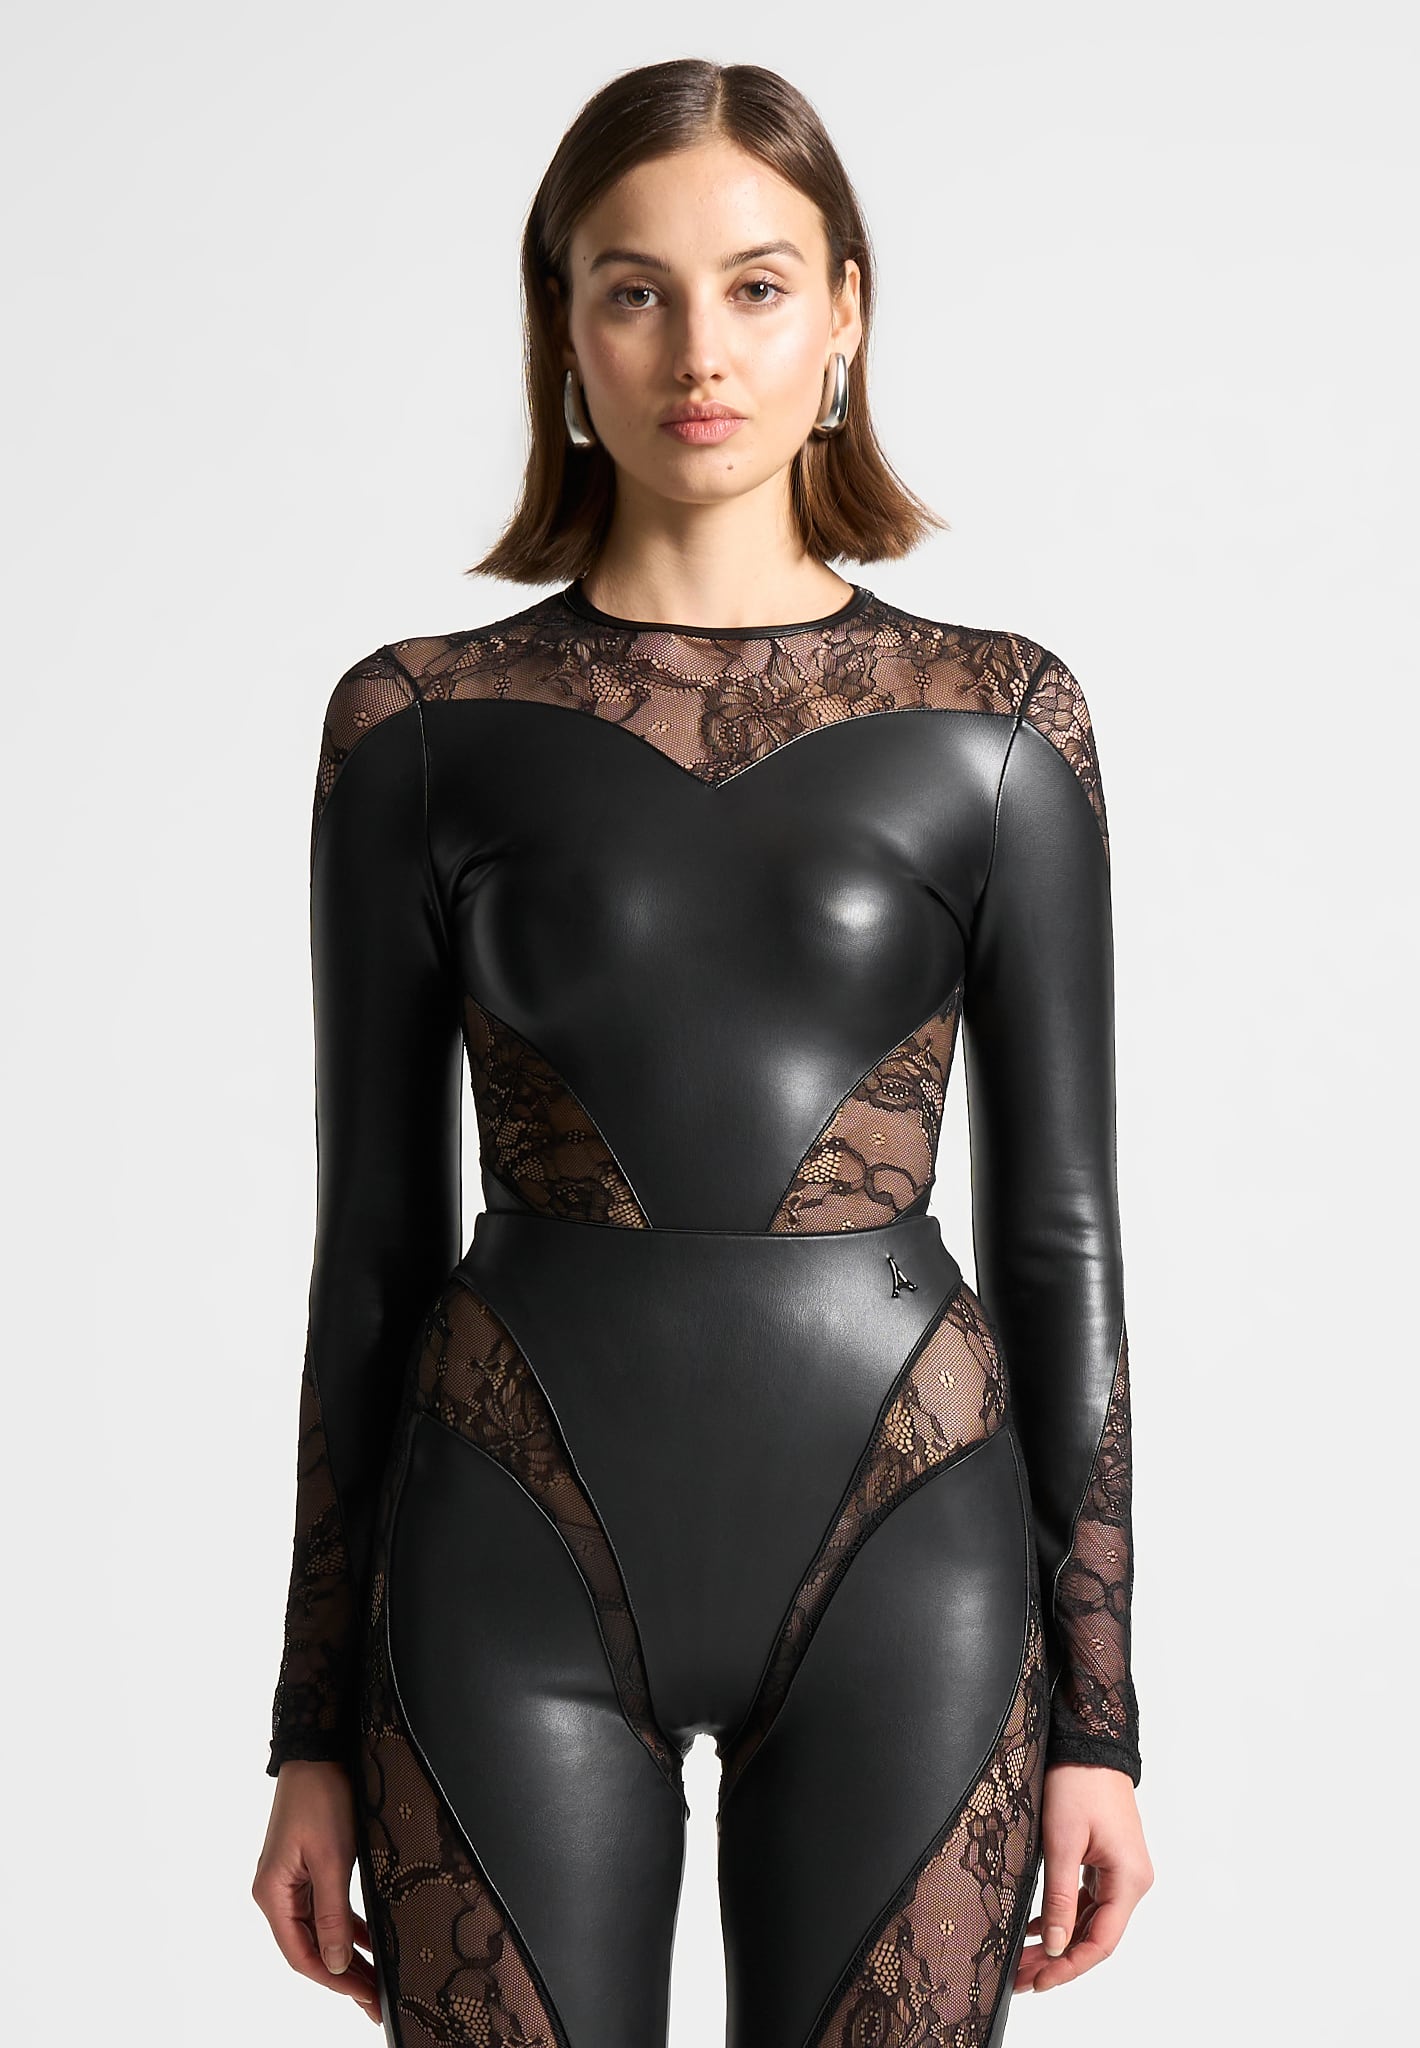 Buy Zivame All Day Bodysuit - Skin at Rs.1706 online